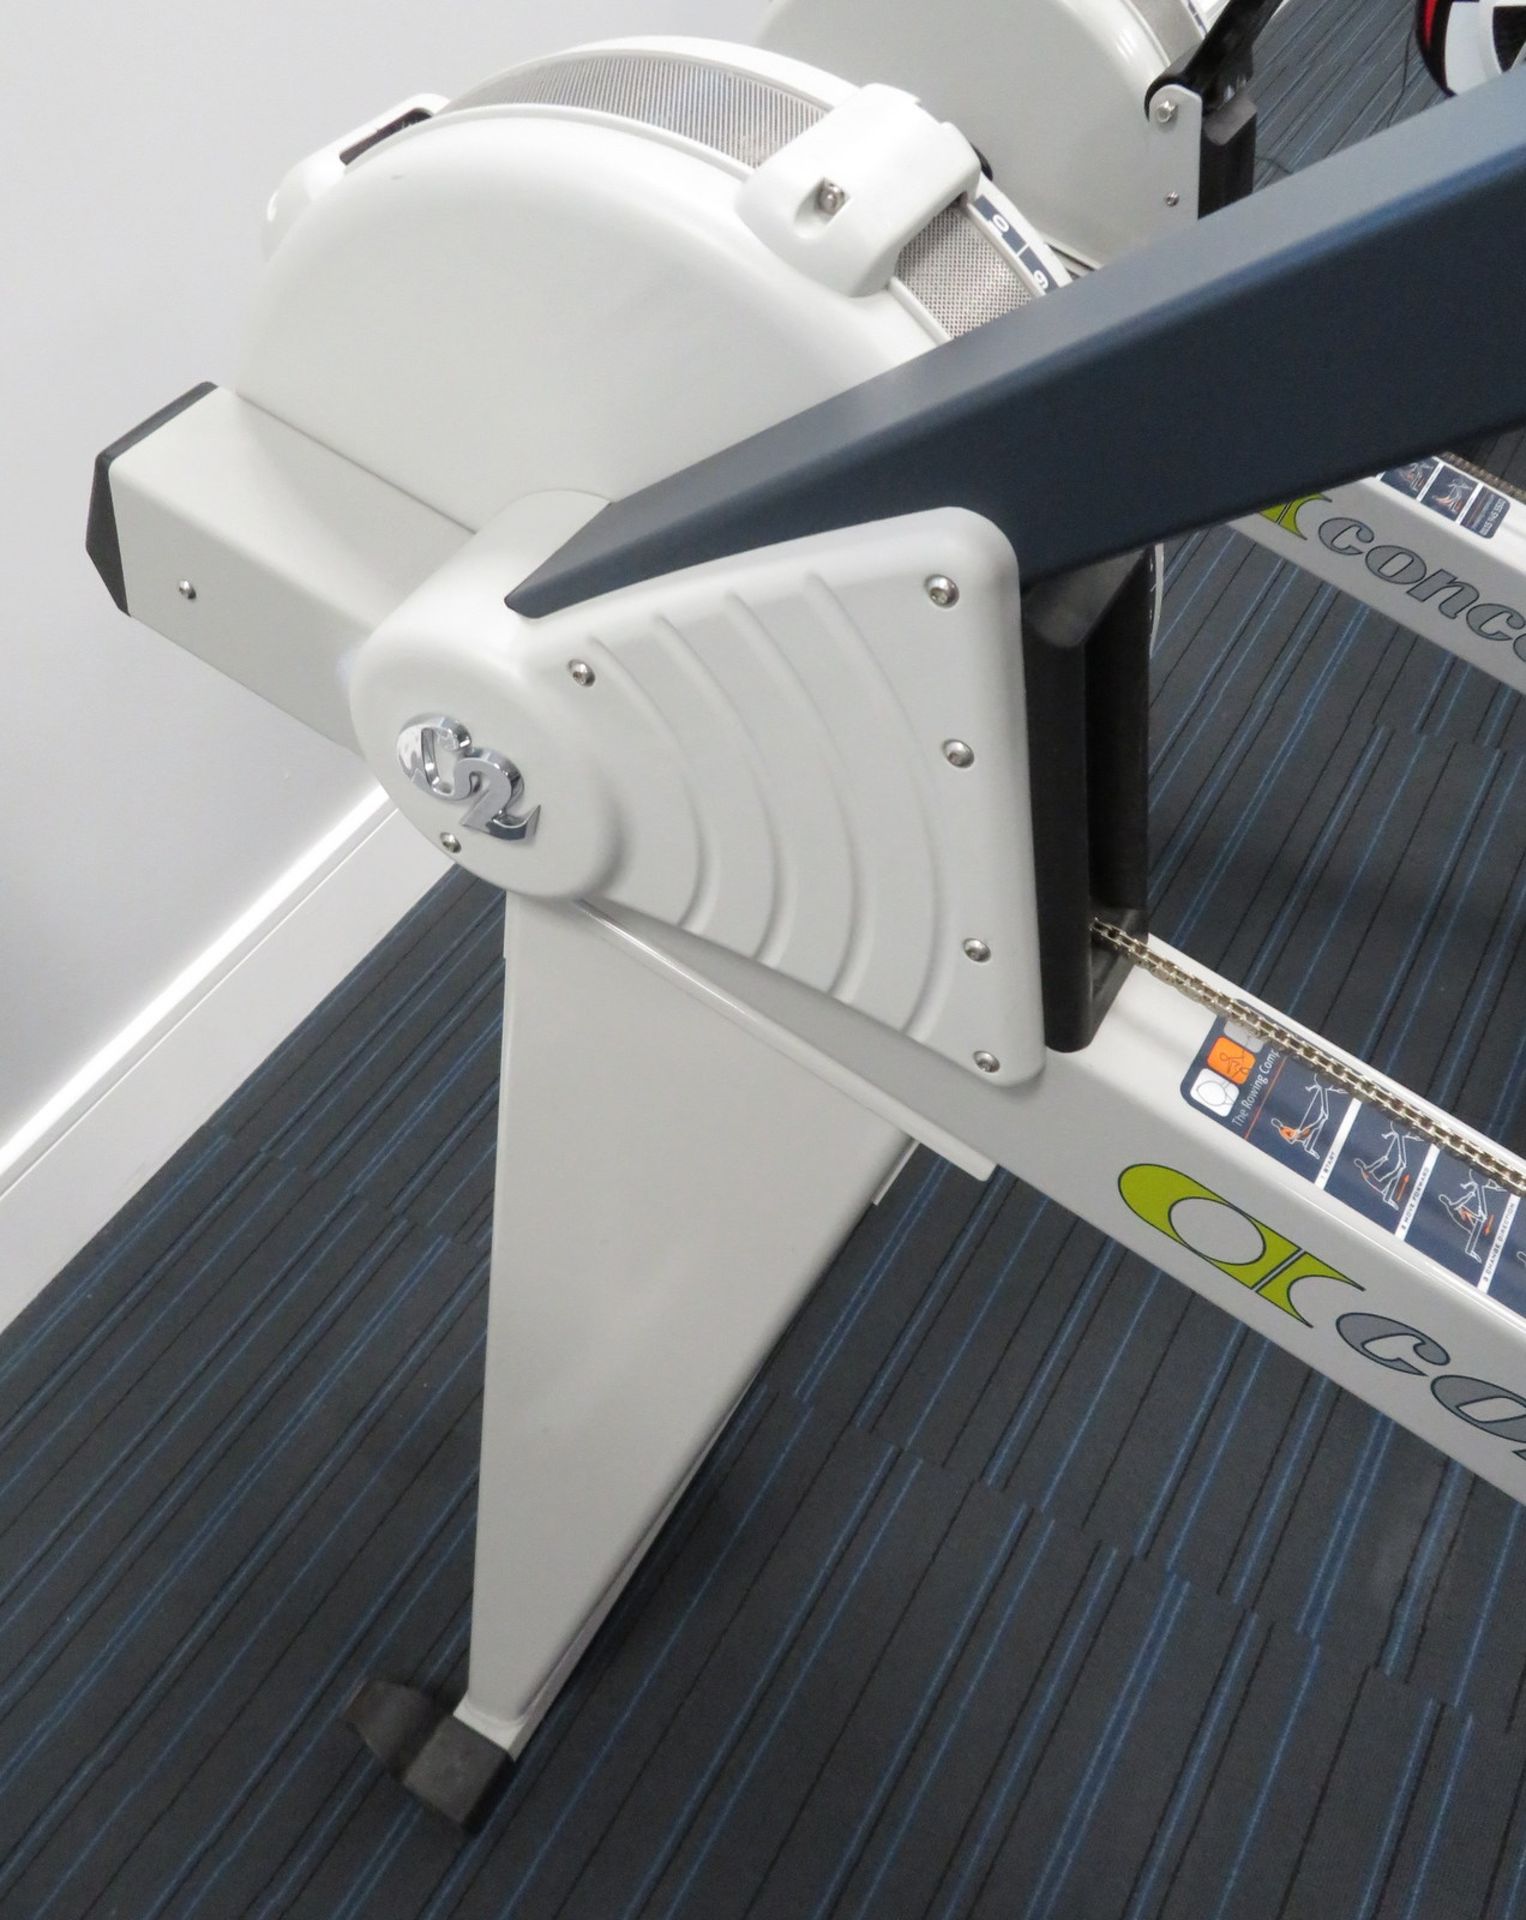 Concept 2 Indoor Rower Model E, Complete With PM4 Display Console. - Image 9 of 10